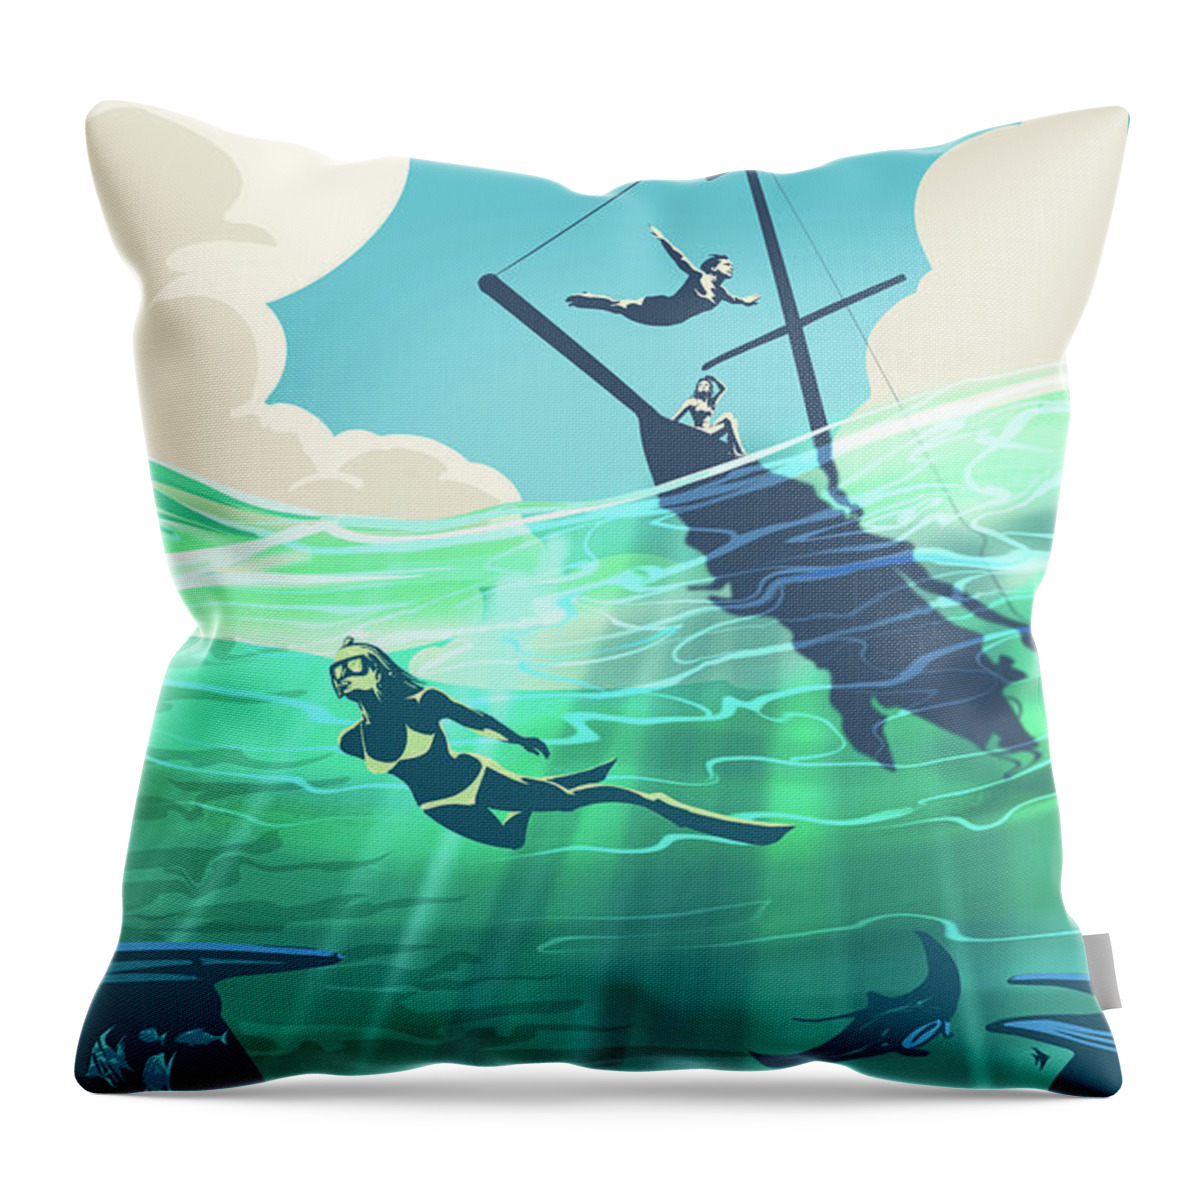 Reef Throw Pillow featuring the painting Reef Diver by Sassan Filsoof